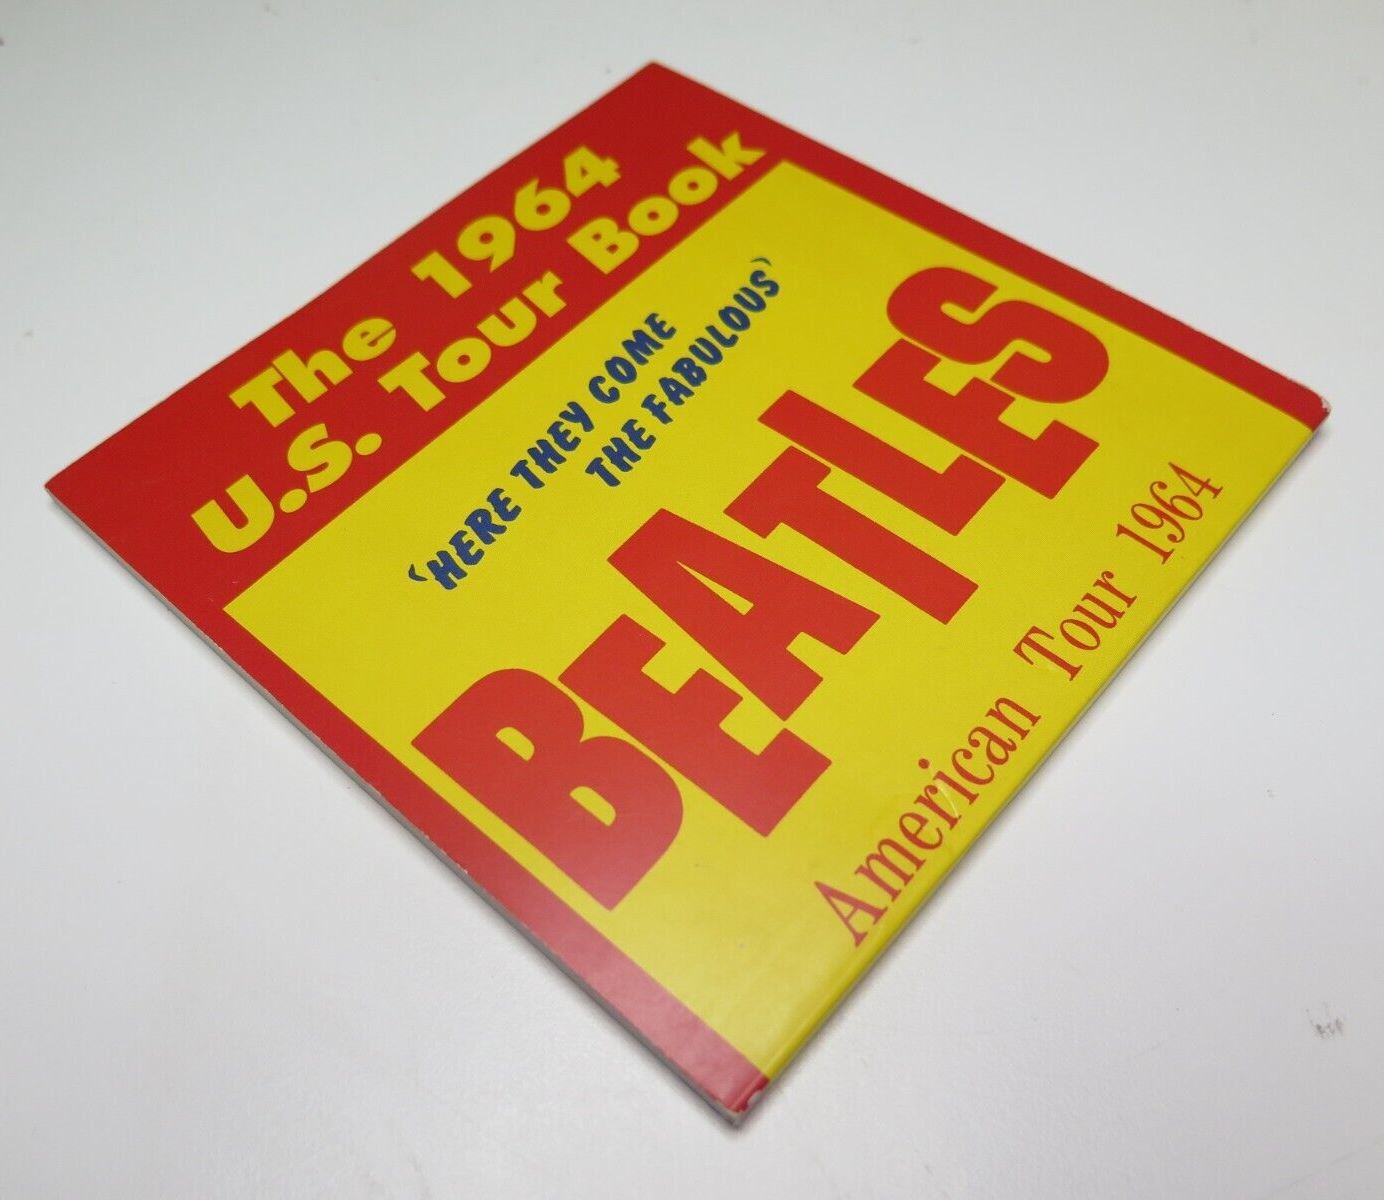 PBS Exclusive: The Beatles- The 1964 U.S. Tour Book, by Craig A. Levinson, ©2017